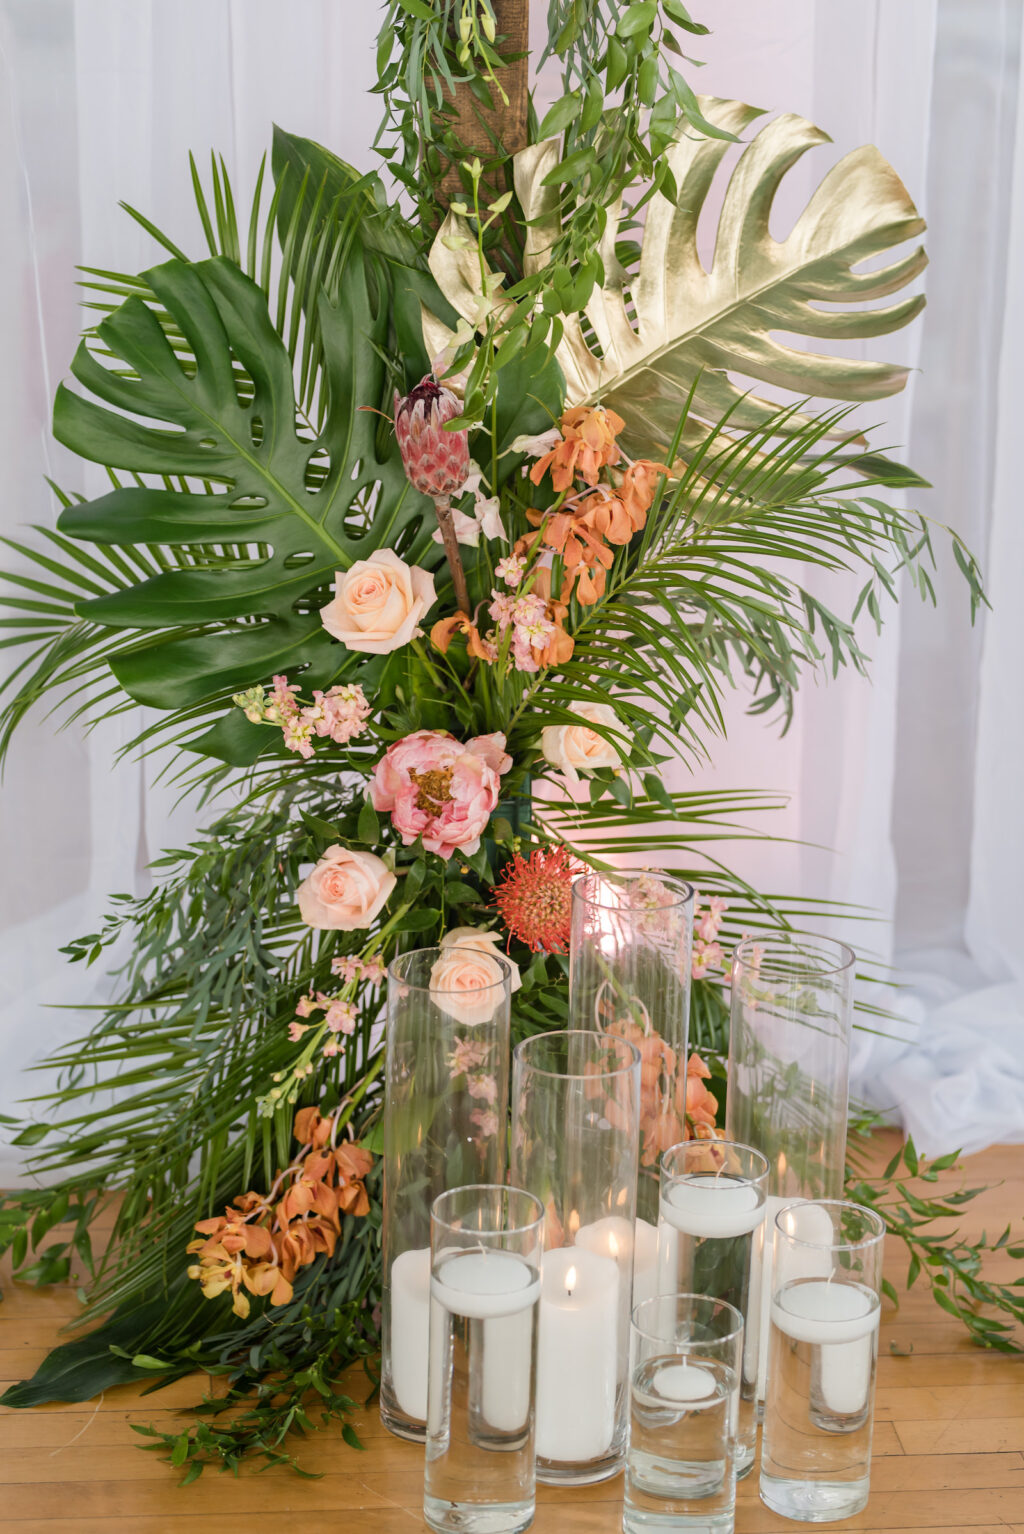 Elegant Tropical Wedding Floral Decor, Gold Painted Monstera Leaves, Palm Fronds, Pink Roses, Pin Cushion Protea, Pink Ginger, Orange Flowers, Floating Candles | Tampa Bay Wedding Planner Eventfull Weddings